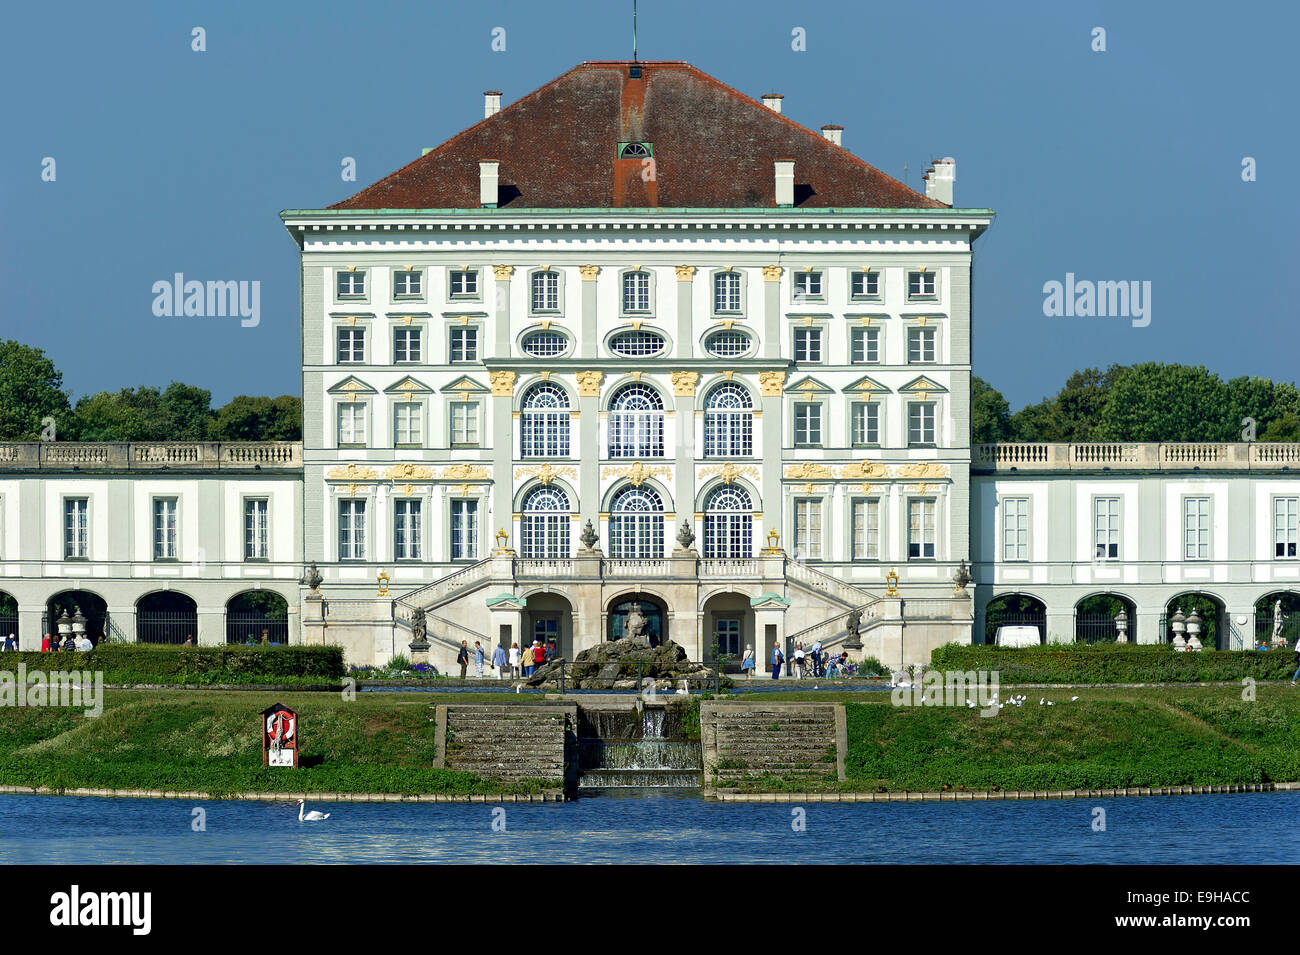 East side with canal, Nymphenburg Palace, Munich, Upper Bavaria, Bavaria, Germany Stock Photo